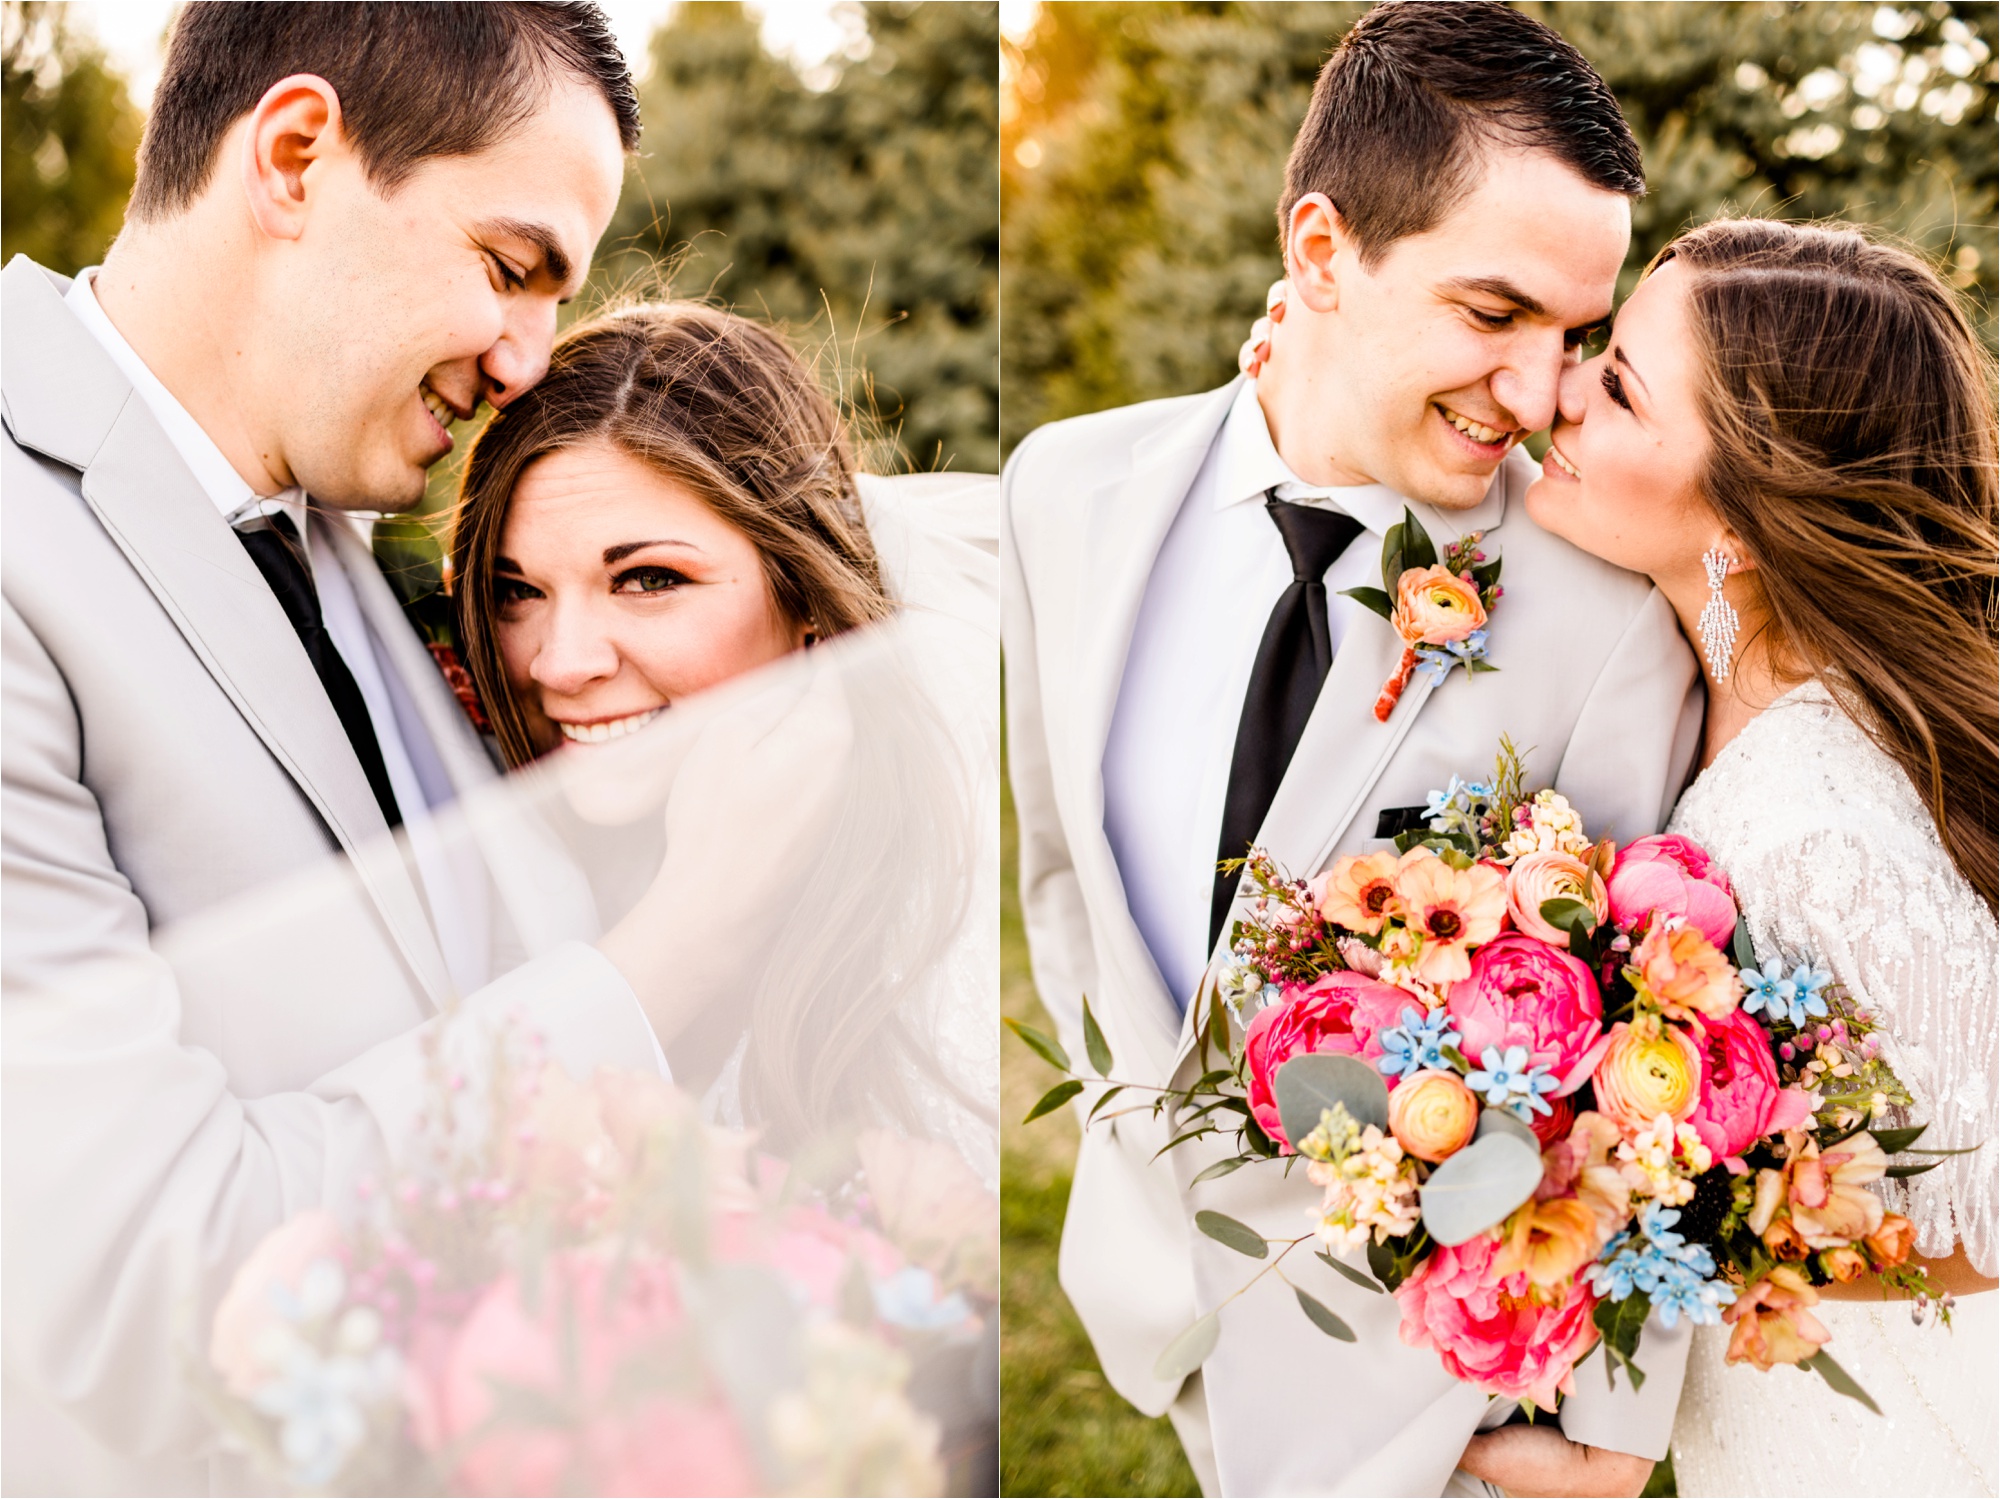 Caitlin and Luke Photography, Illinois Wedding Photographers, Champaign Wedding Photographers, Bloomington Normal Wedding Photographers, Romantic Red and Pink Sunset Styled Shoot_9575.jpg